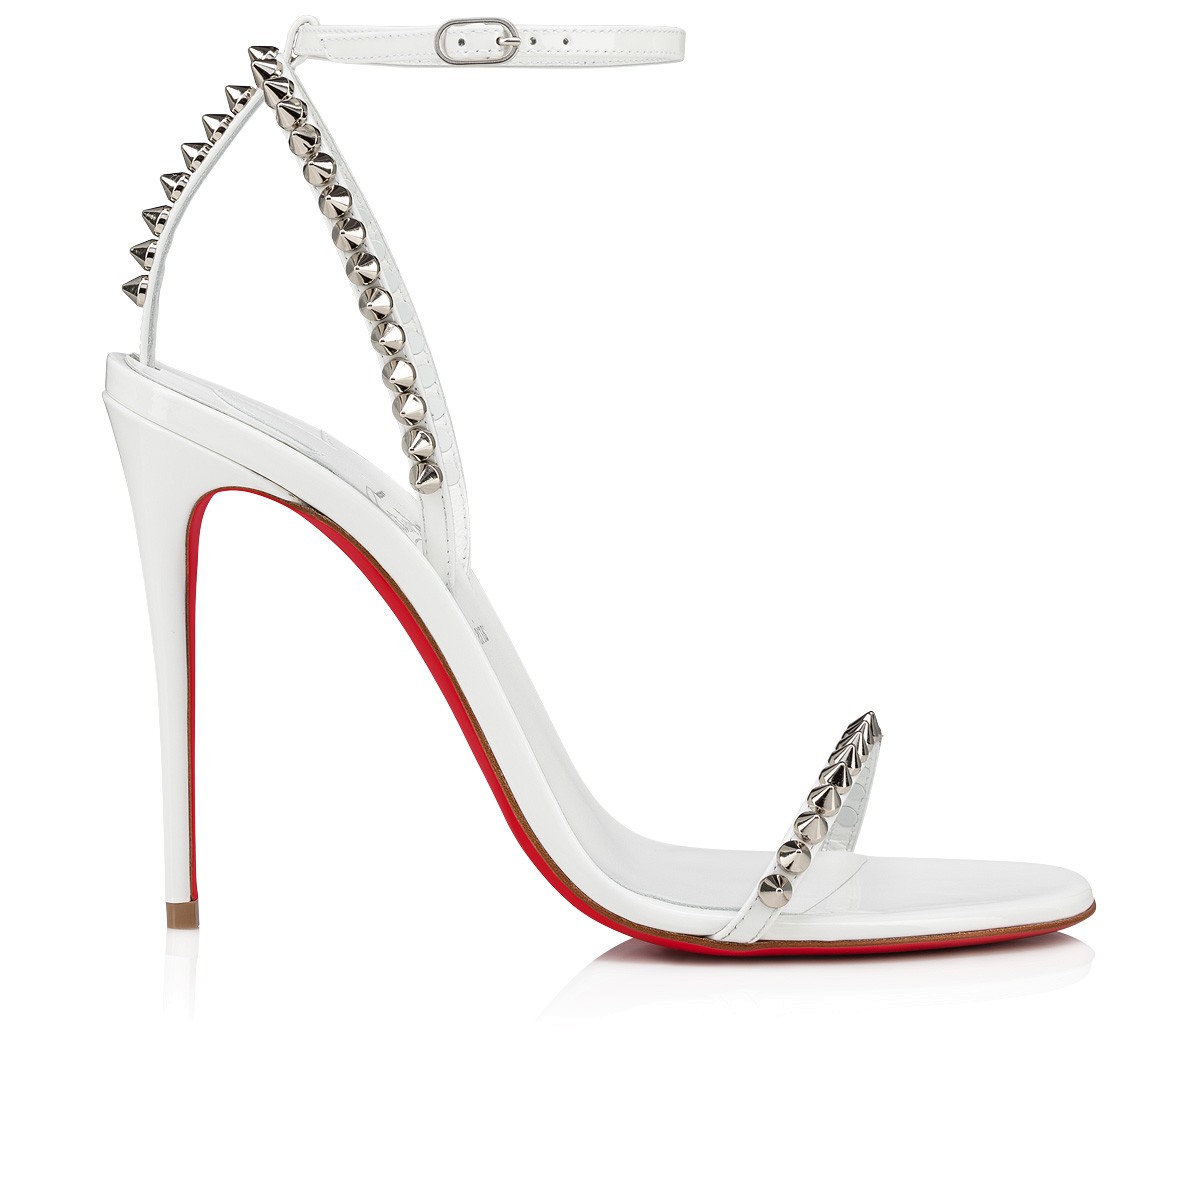 CHRISTIAN LOUBOUTIN So Me 100 studded leather sandals